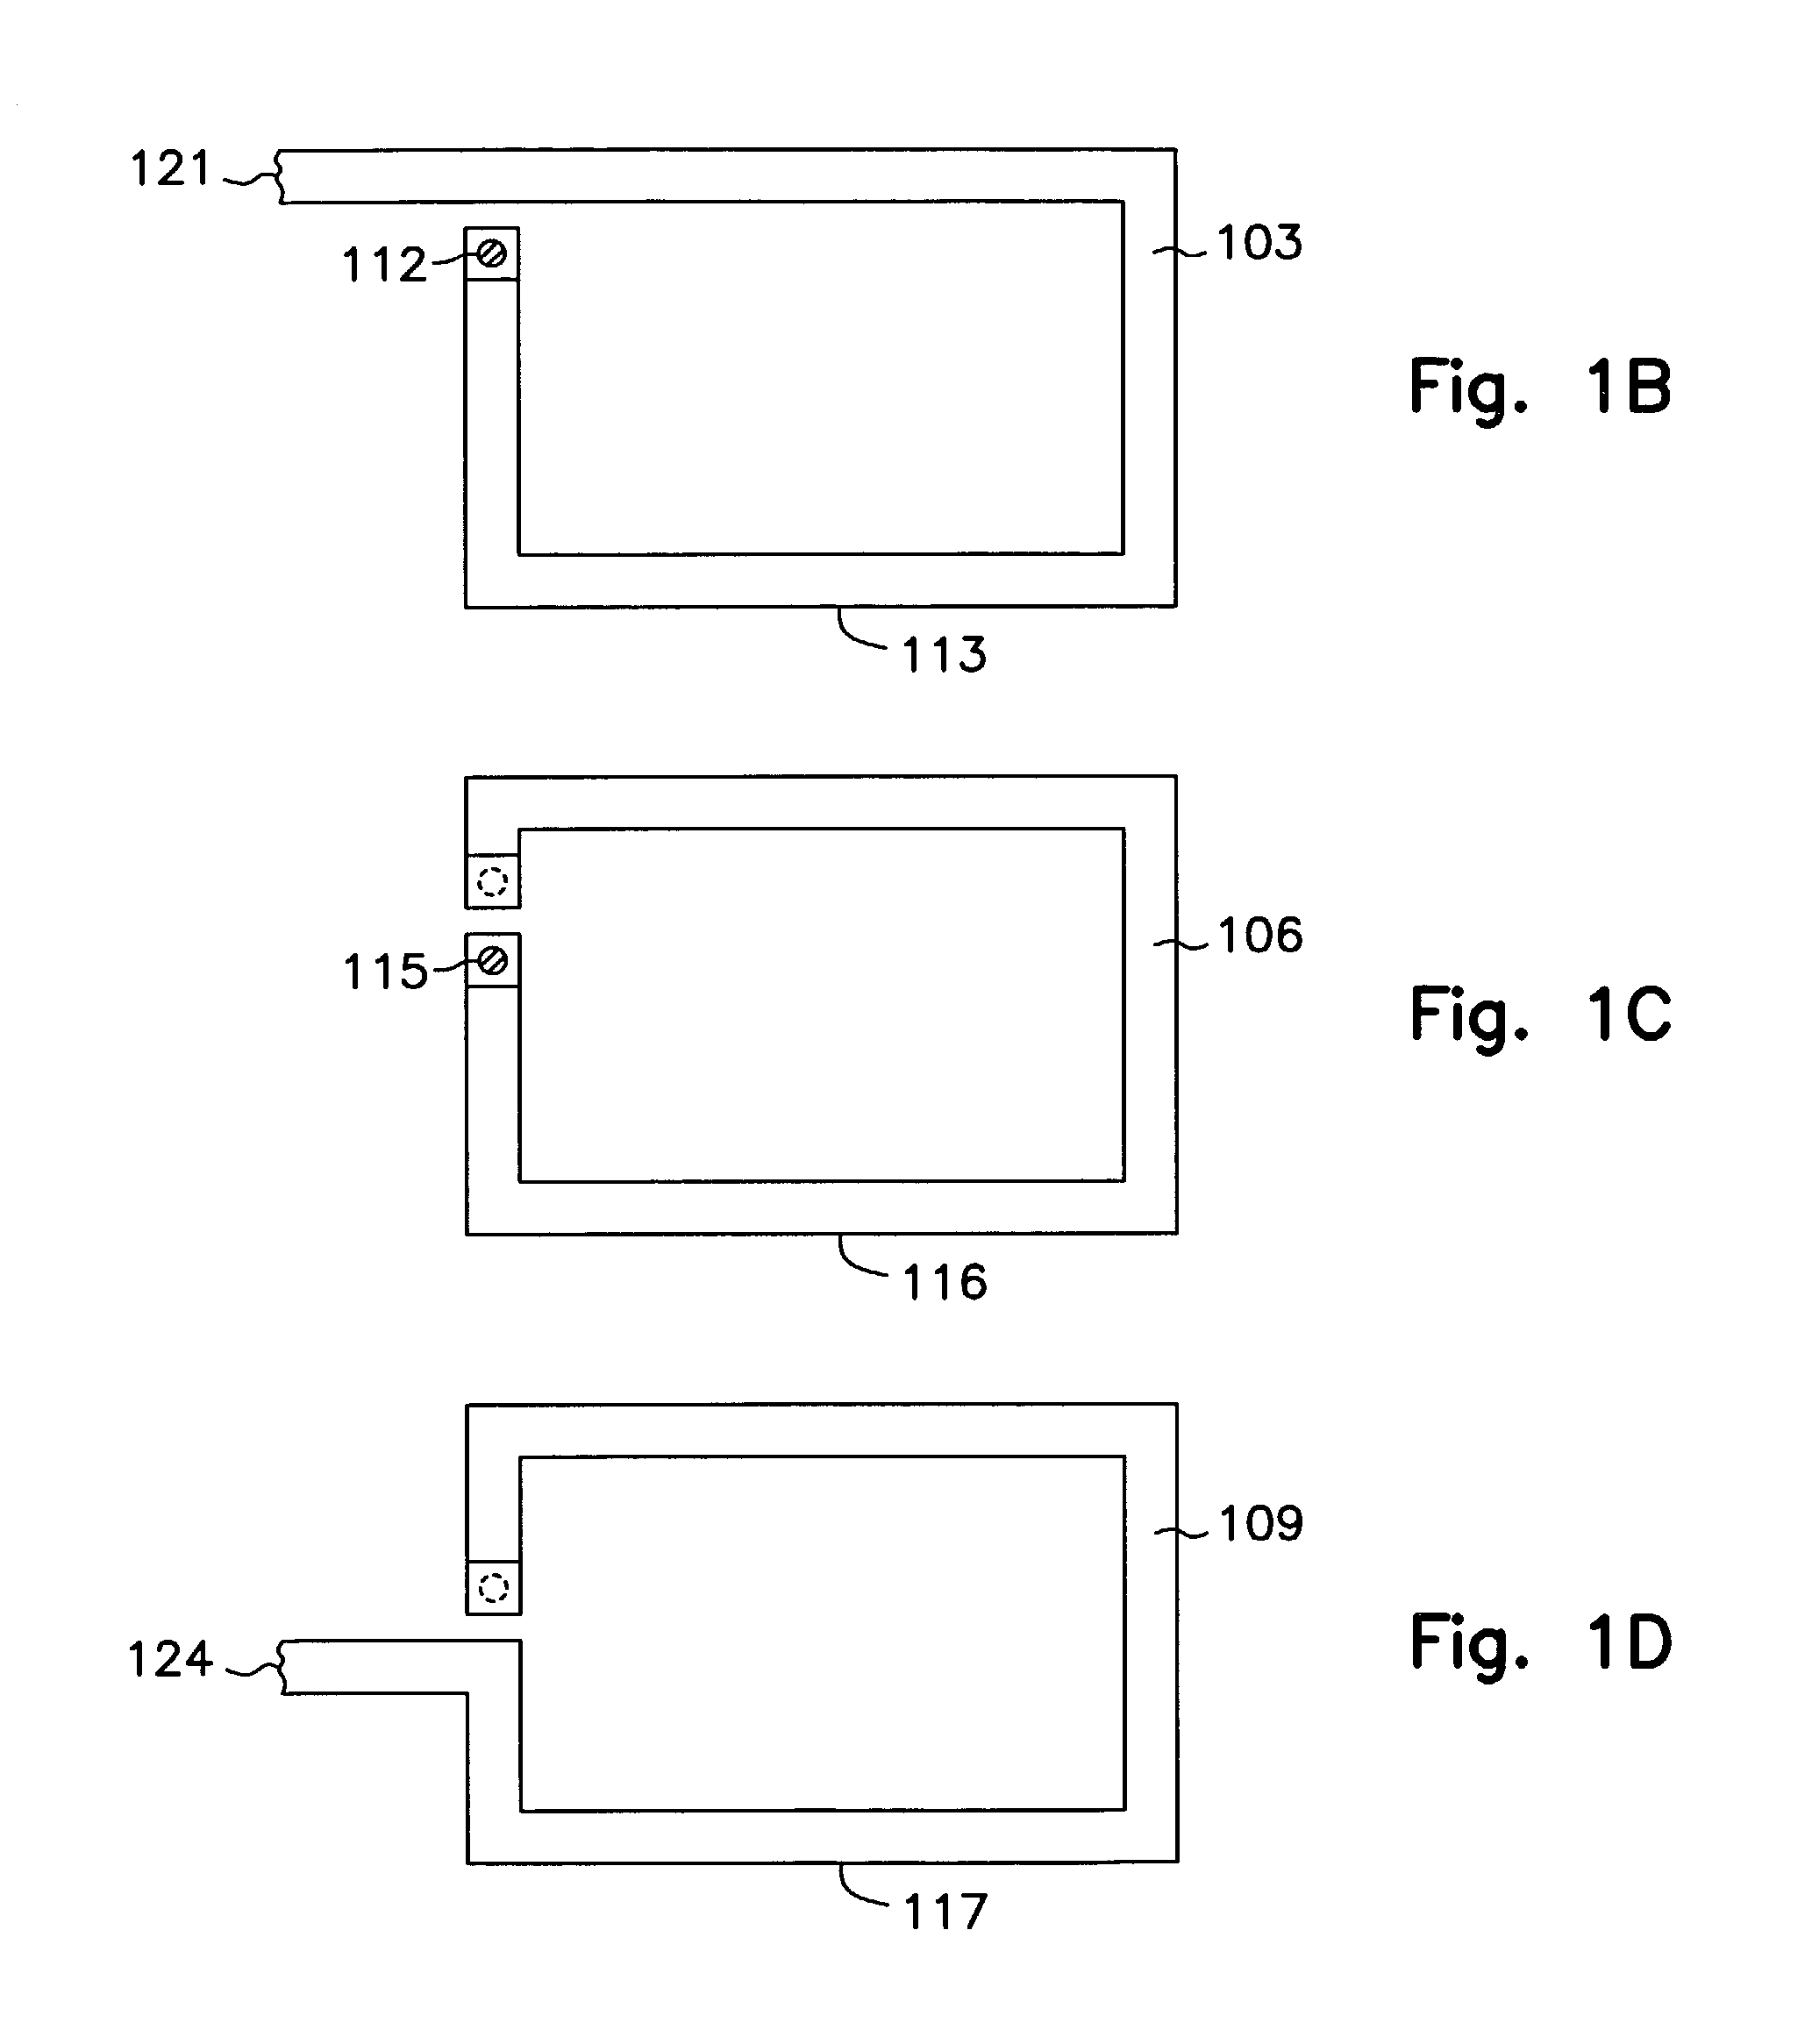 Open pattern inductor